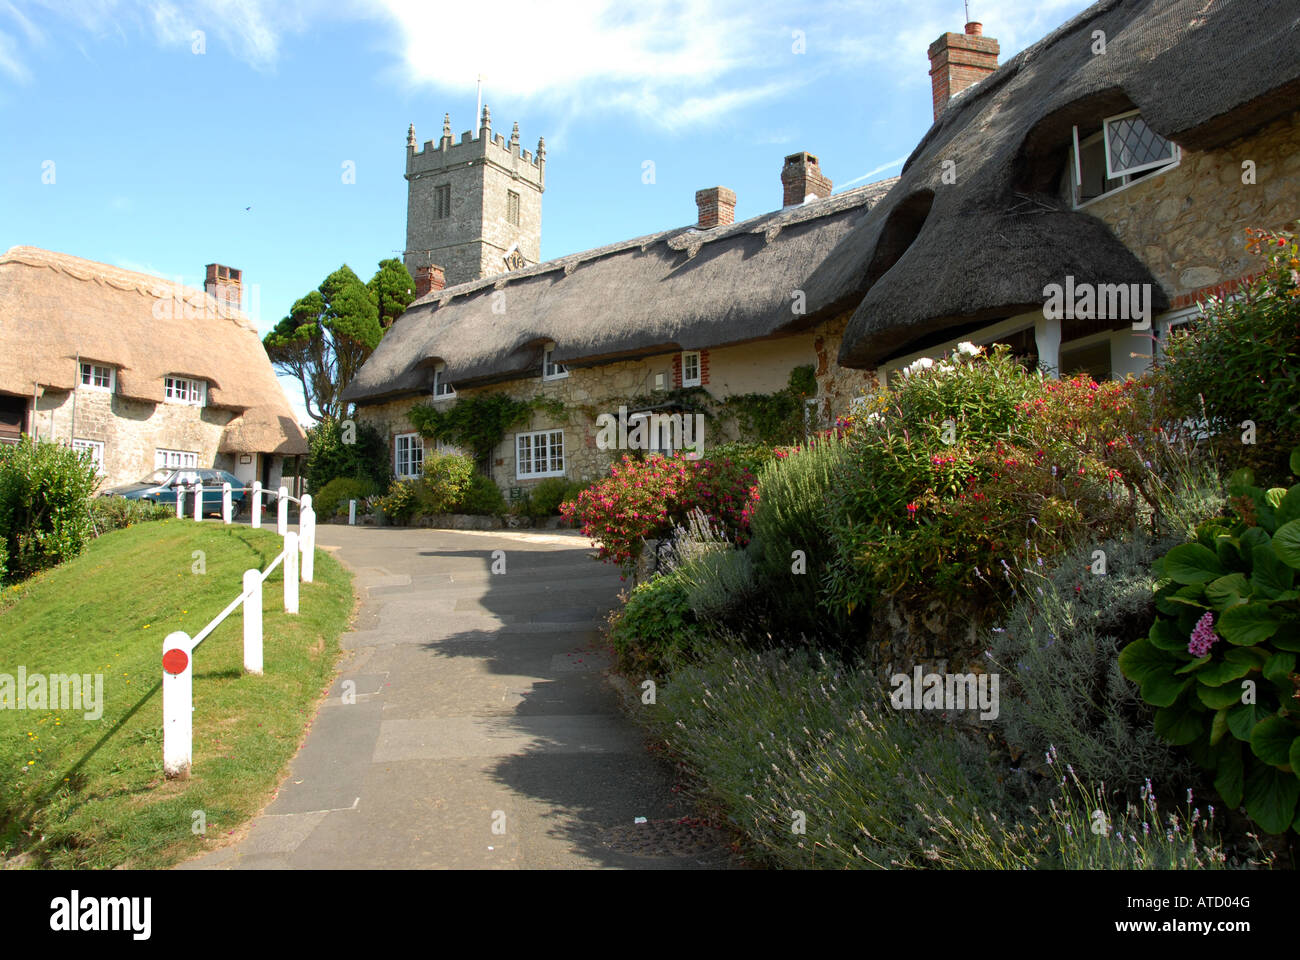 The picturesque village of Godshill on the Isle of Wight lies off the south coast of England The small village of Godshill is popular with tourists fo Stock Photo